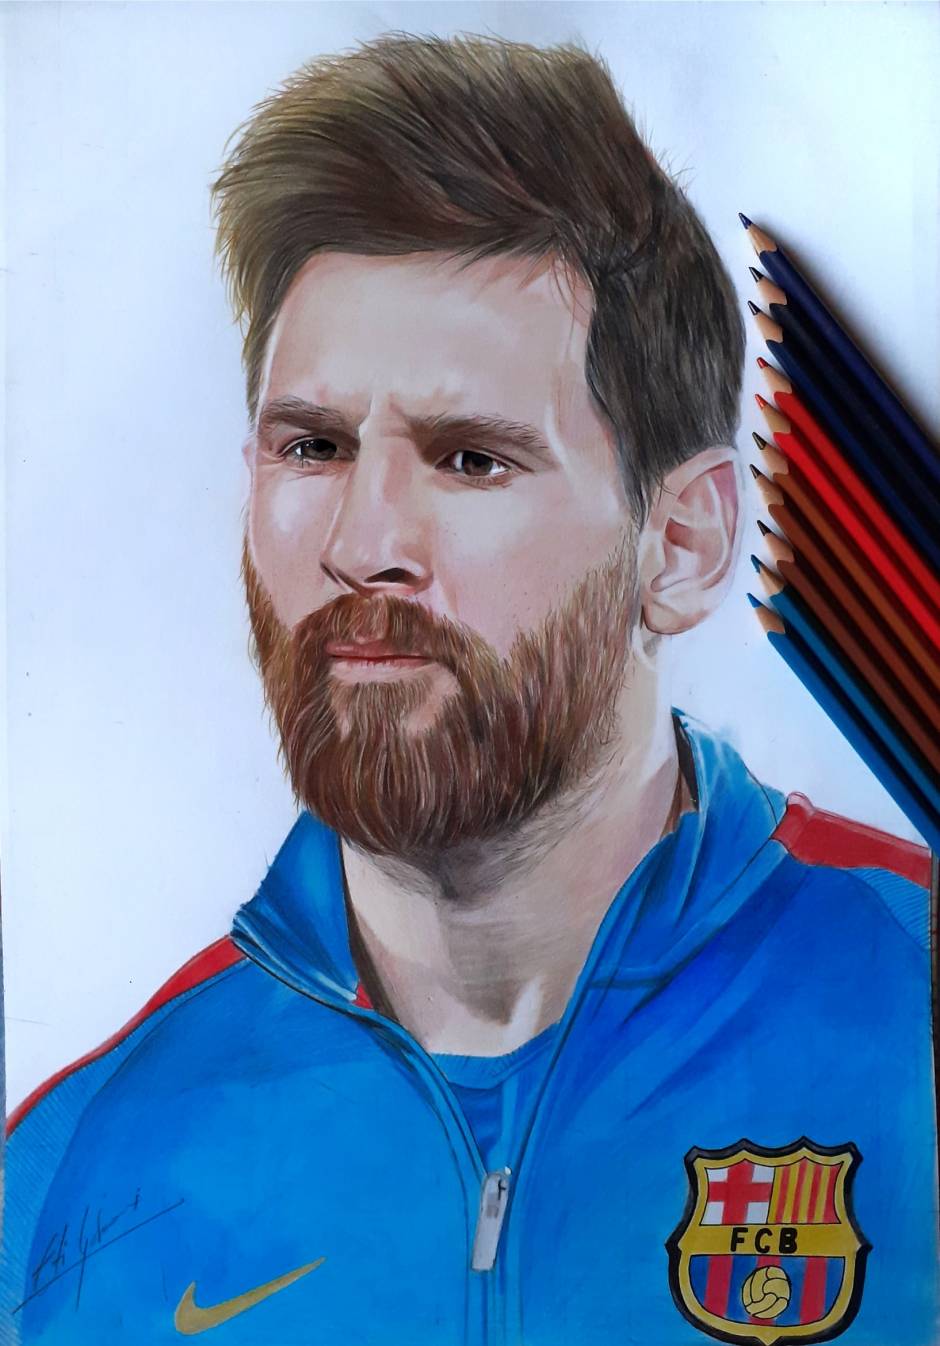 Lionel Messi pencil drawing by gq2020 on DeviantArt